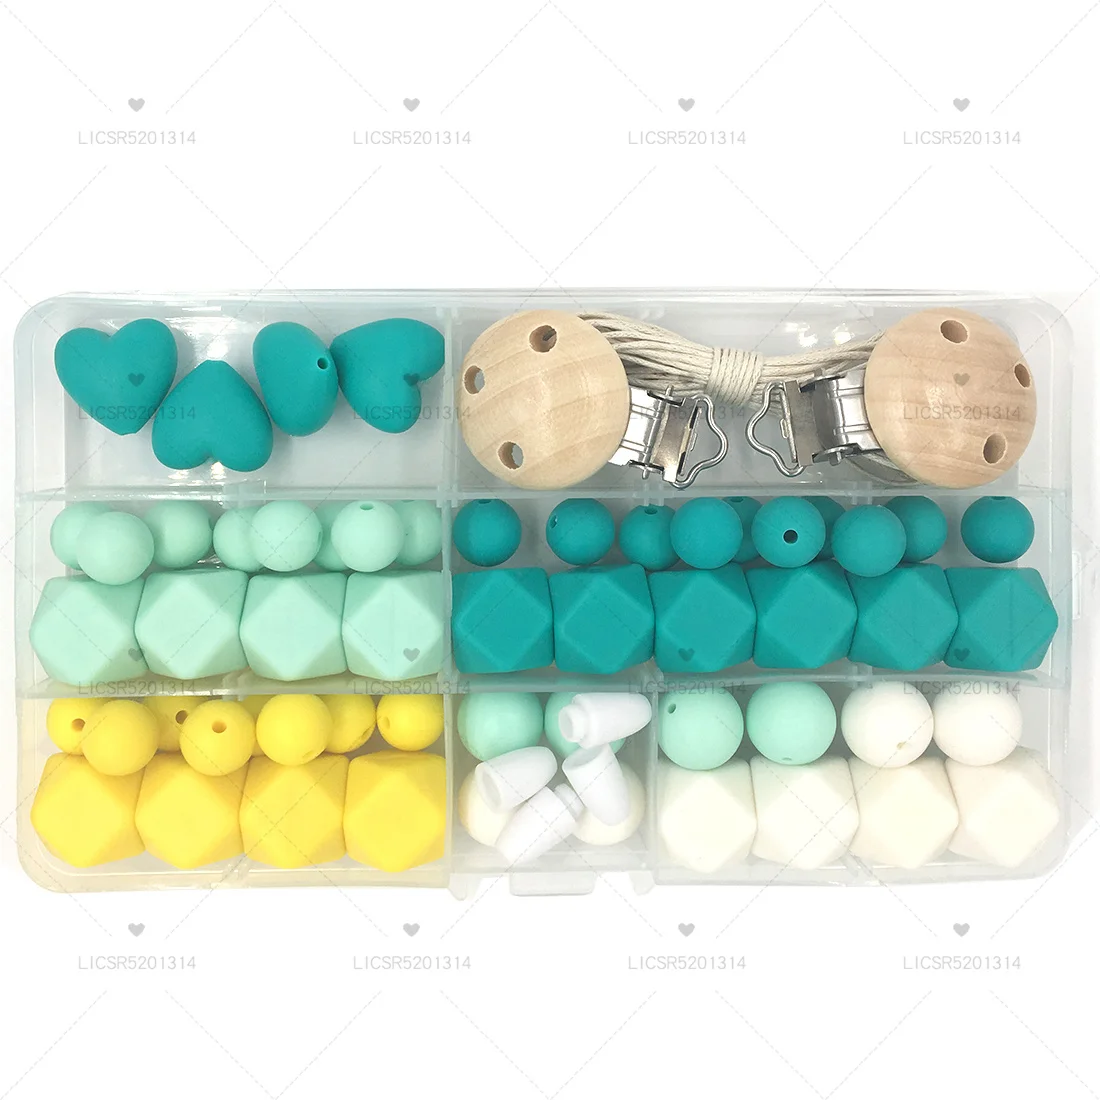 Baby Silicone Teether DIY Crafts Set Pacifier Clips Toy Safe And Natural Silicone Hexagon Beads Teether Necklace Pendants Gift